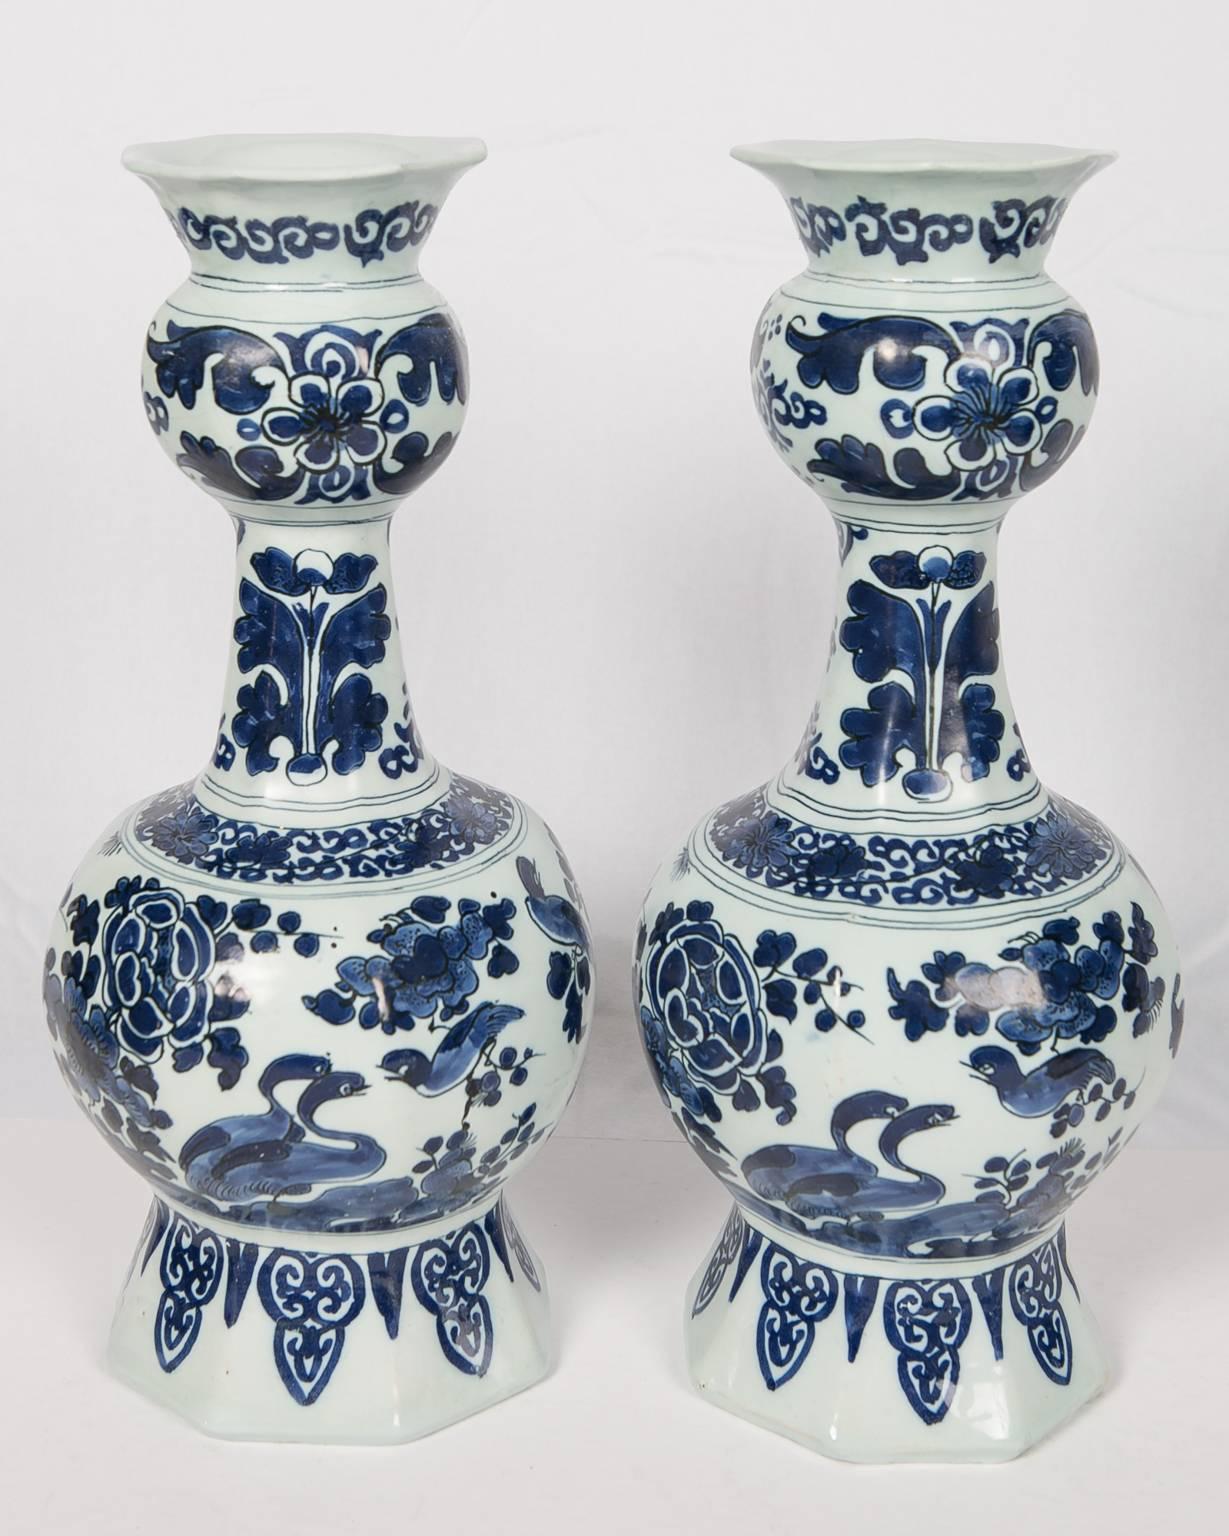 where is delft pottery made